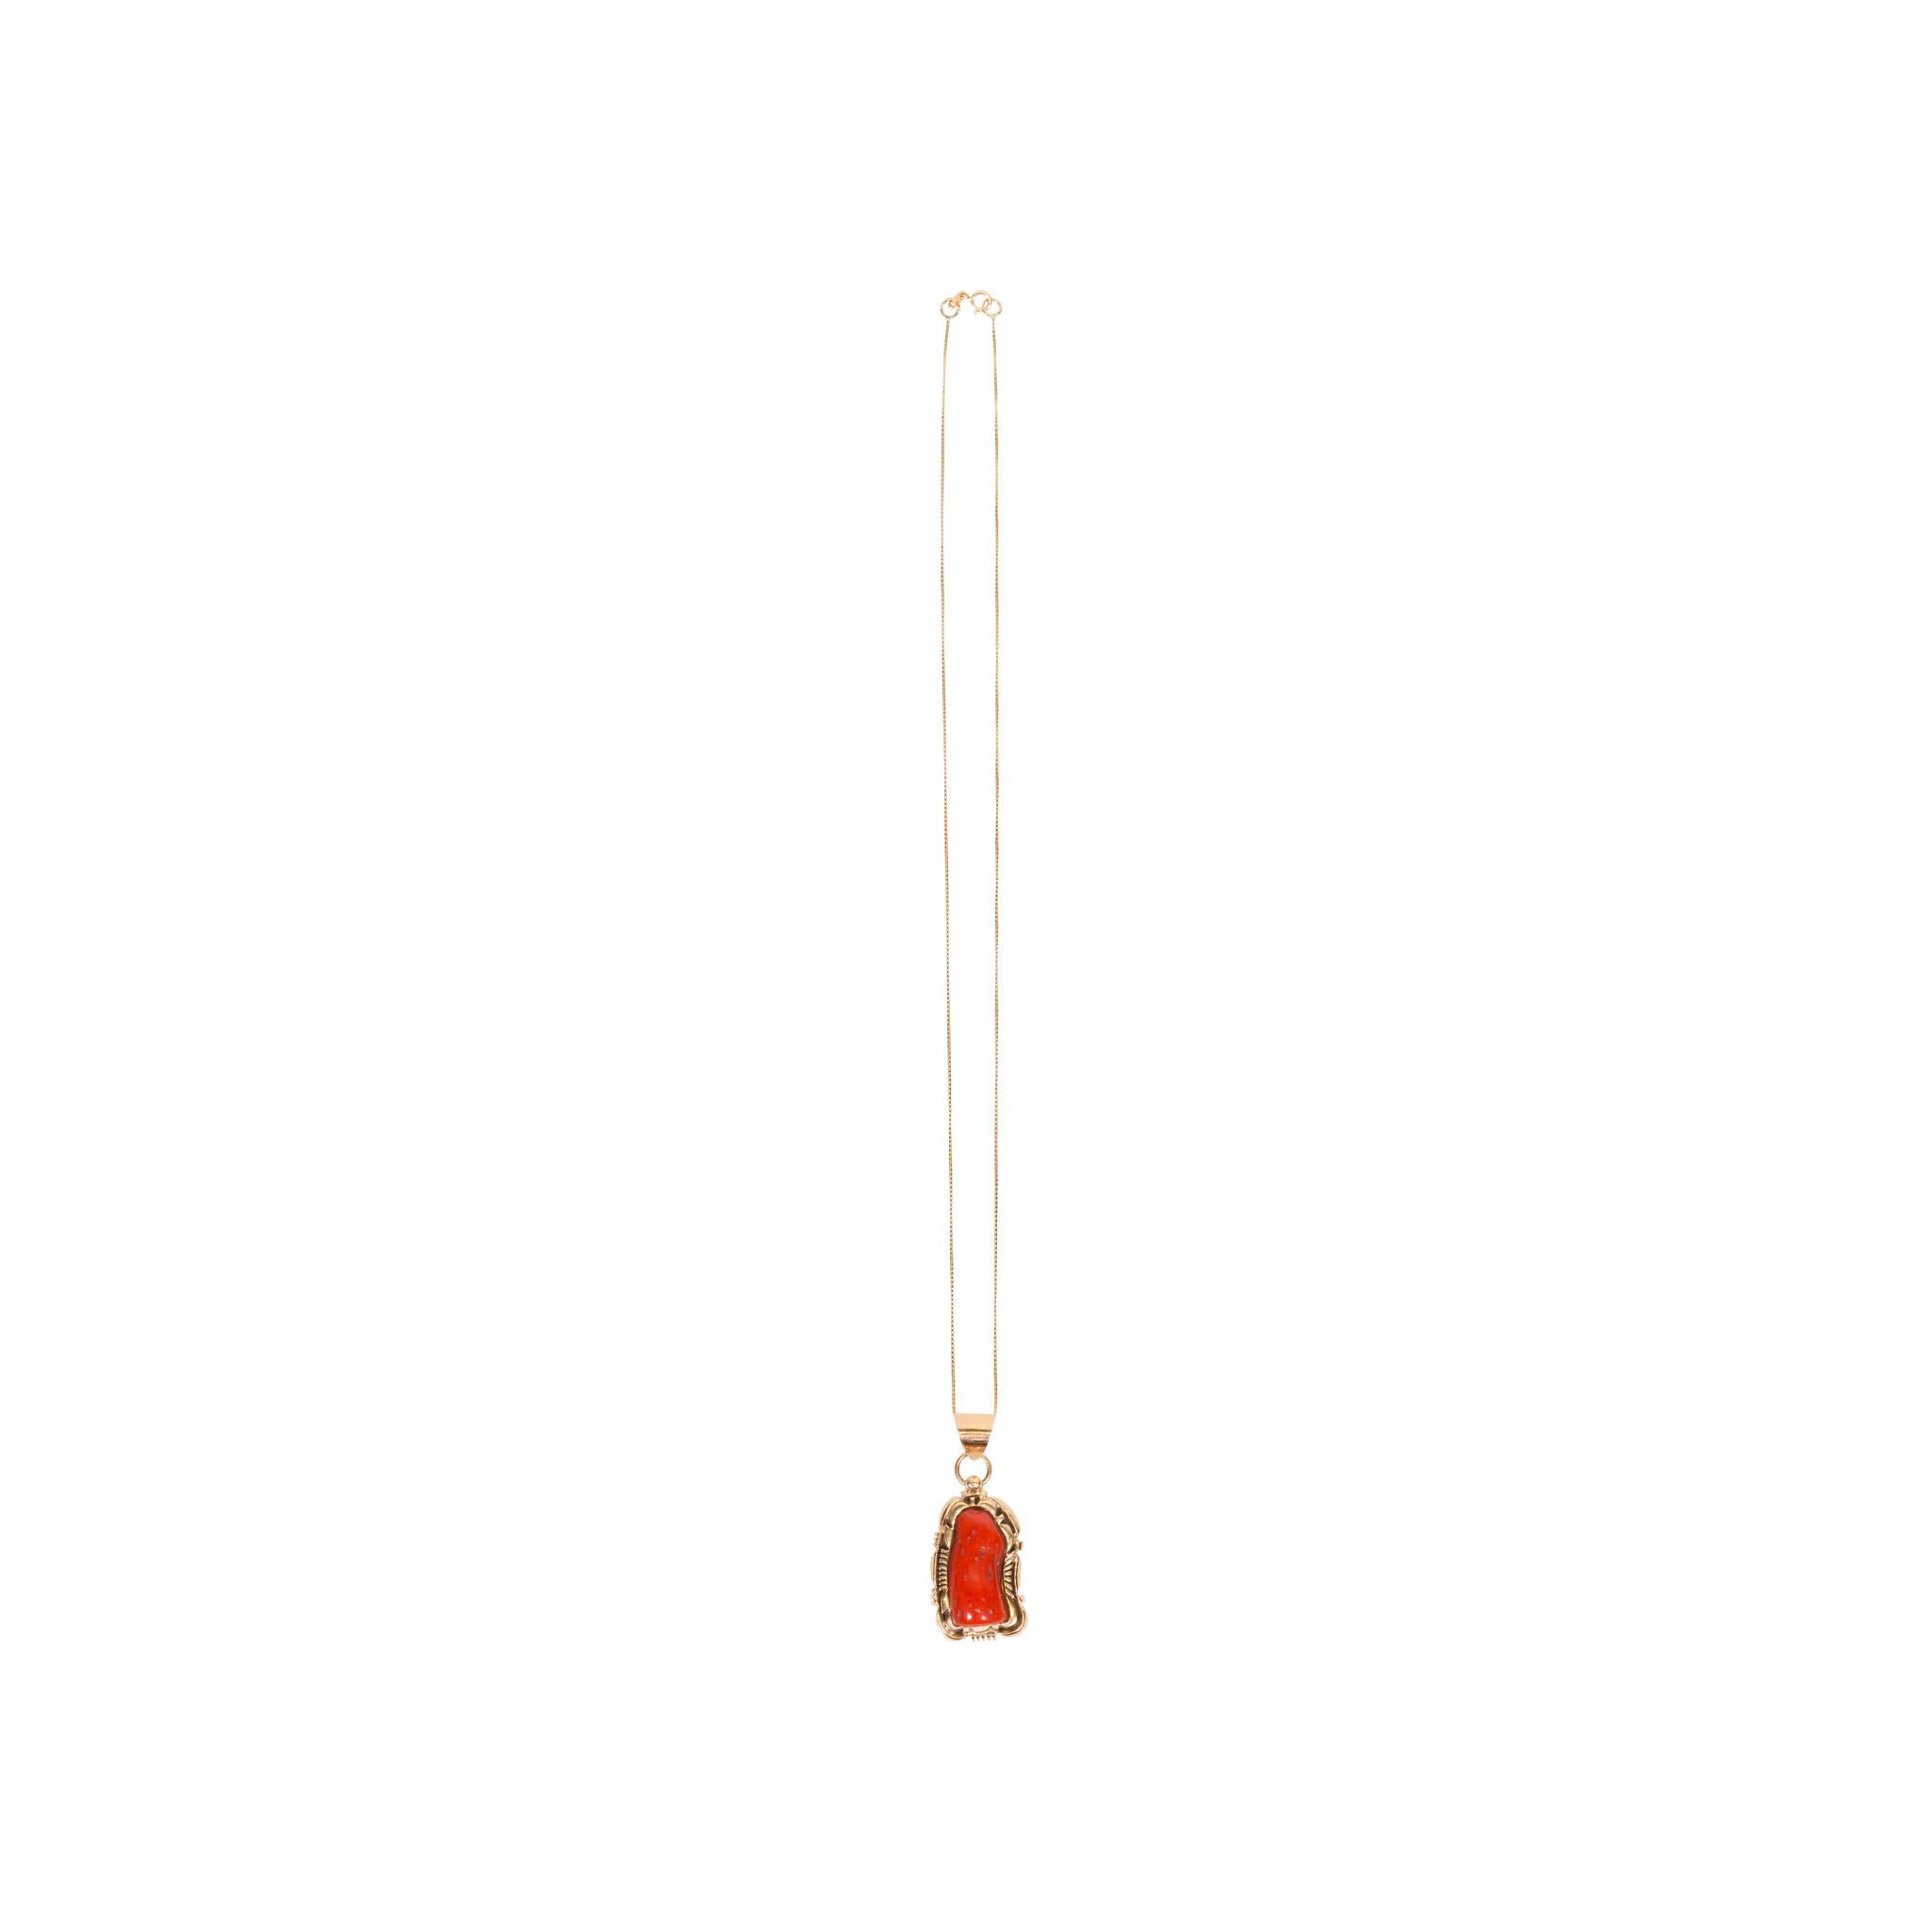 Stunning 14kt gold pendant and chain with exceptional deep coral nugget. Designed and stamped by Navajo artist Robert Kelly.
Pendant 1 3/4